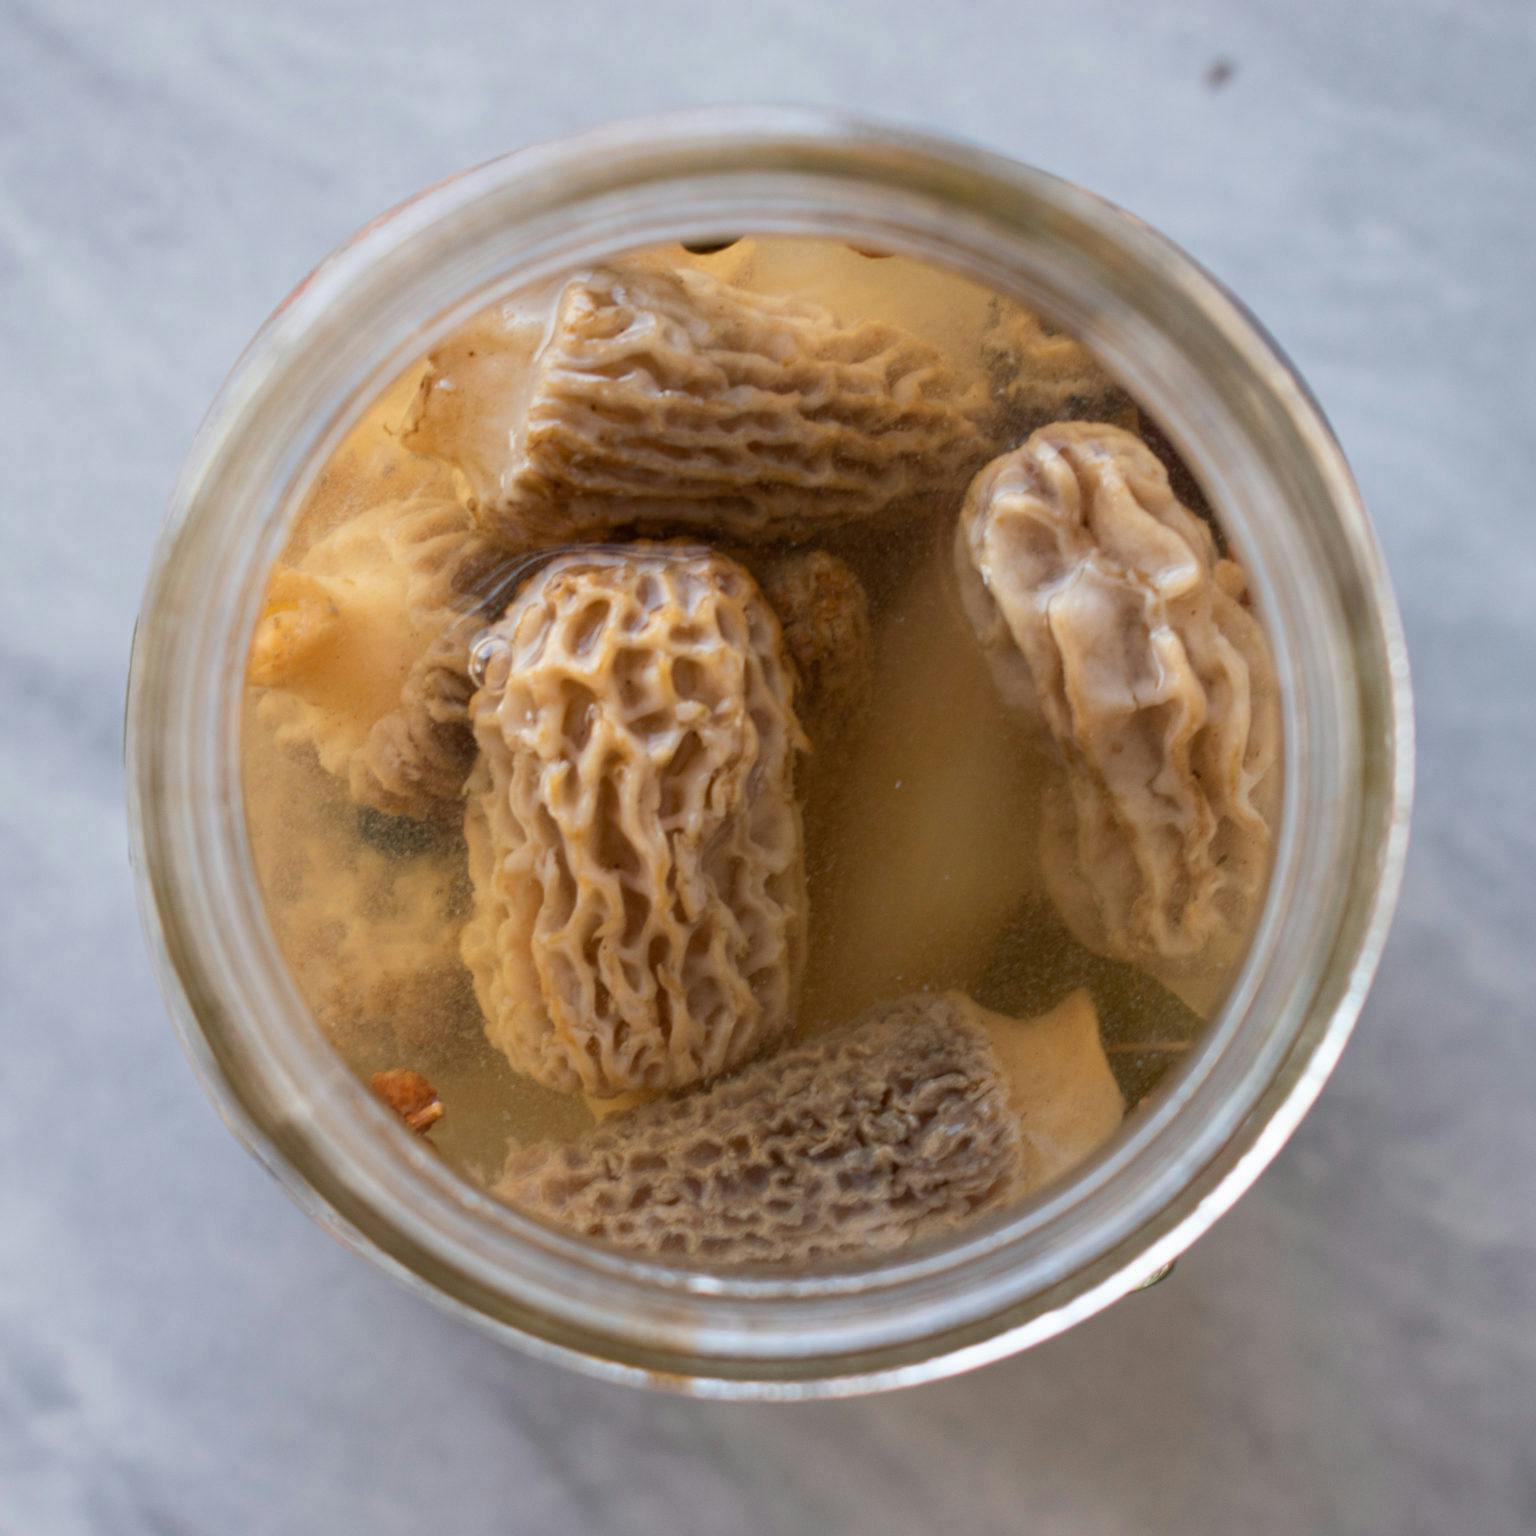 Cook morels and marinate for up to two weeks
